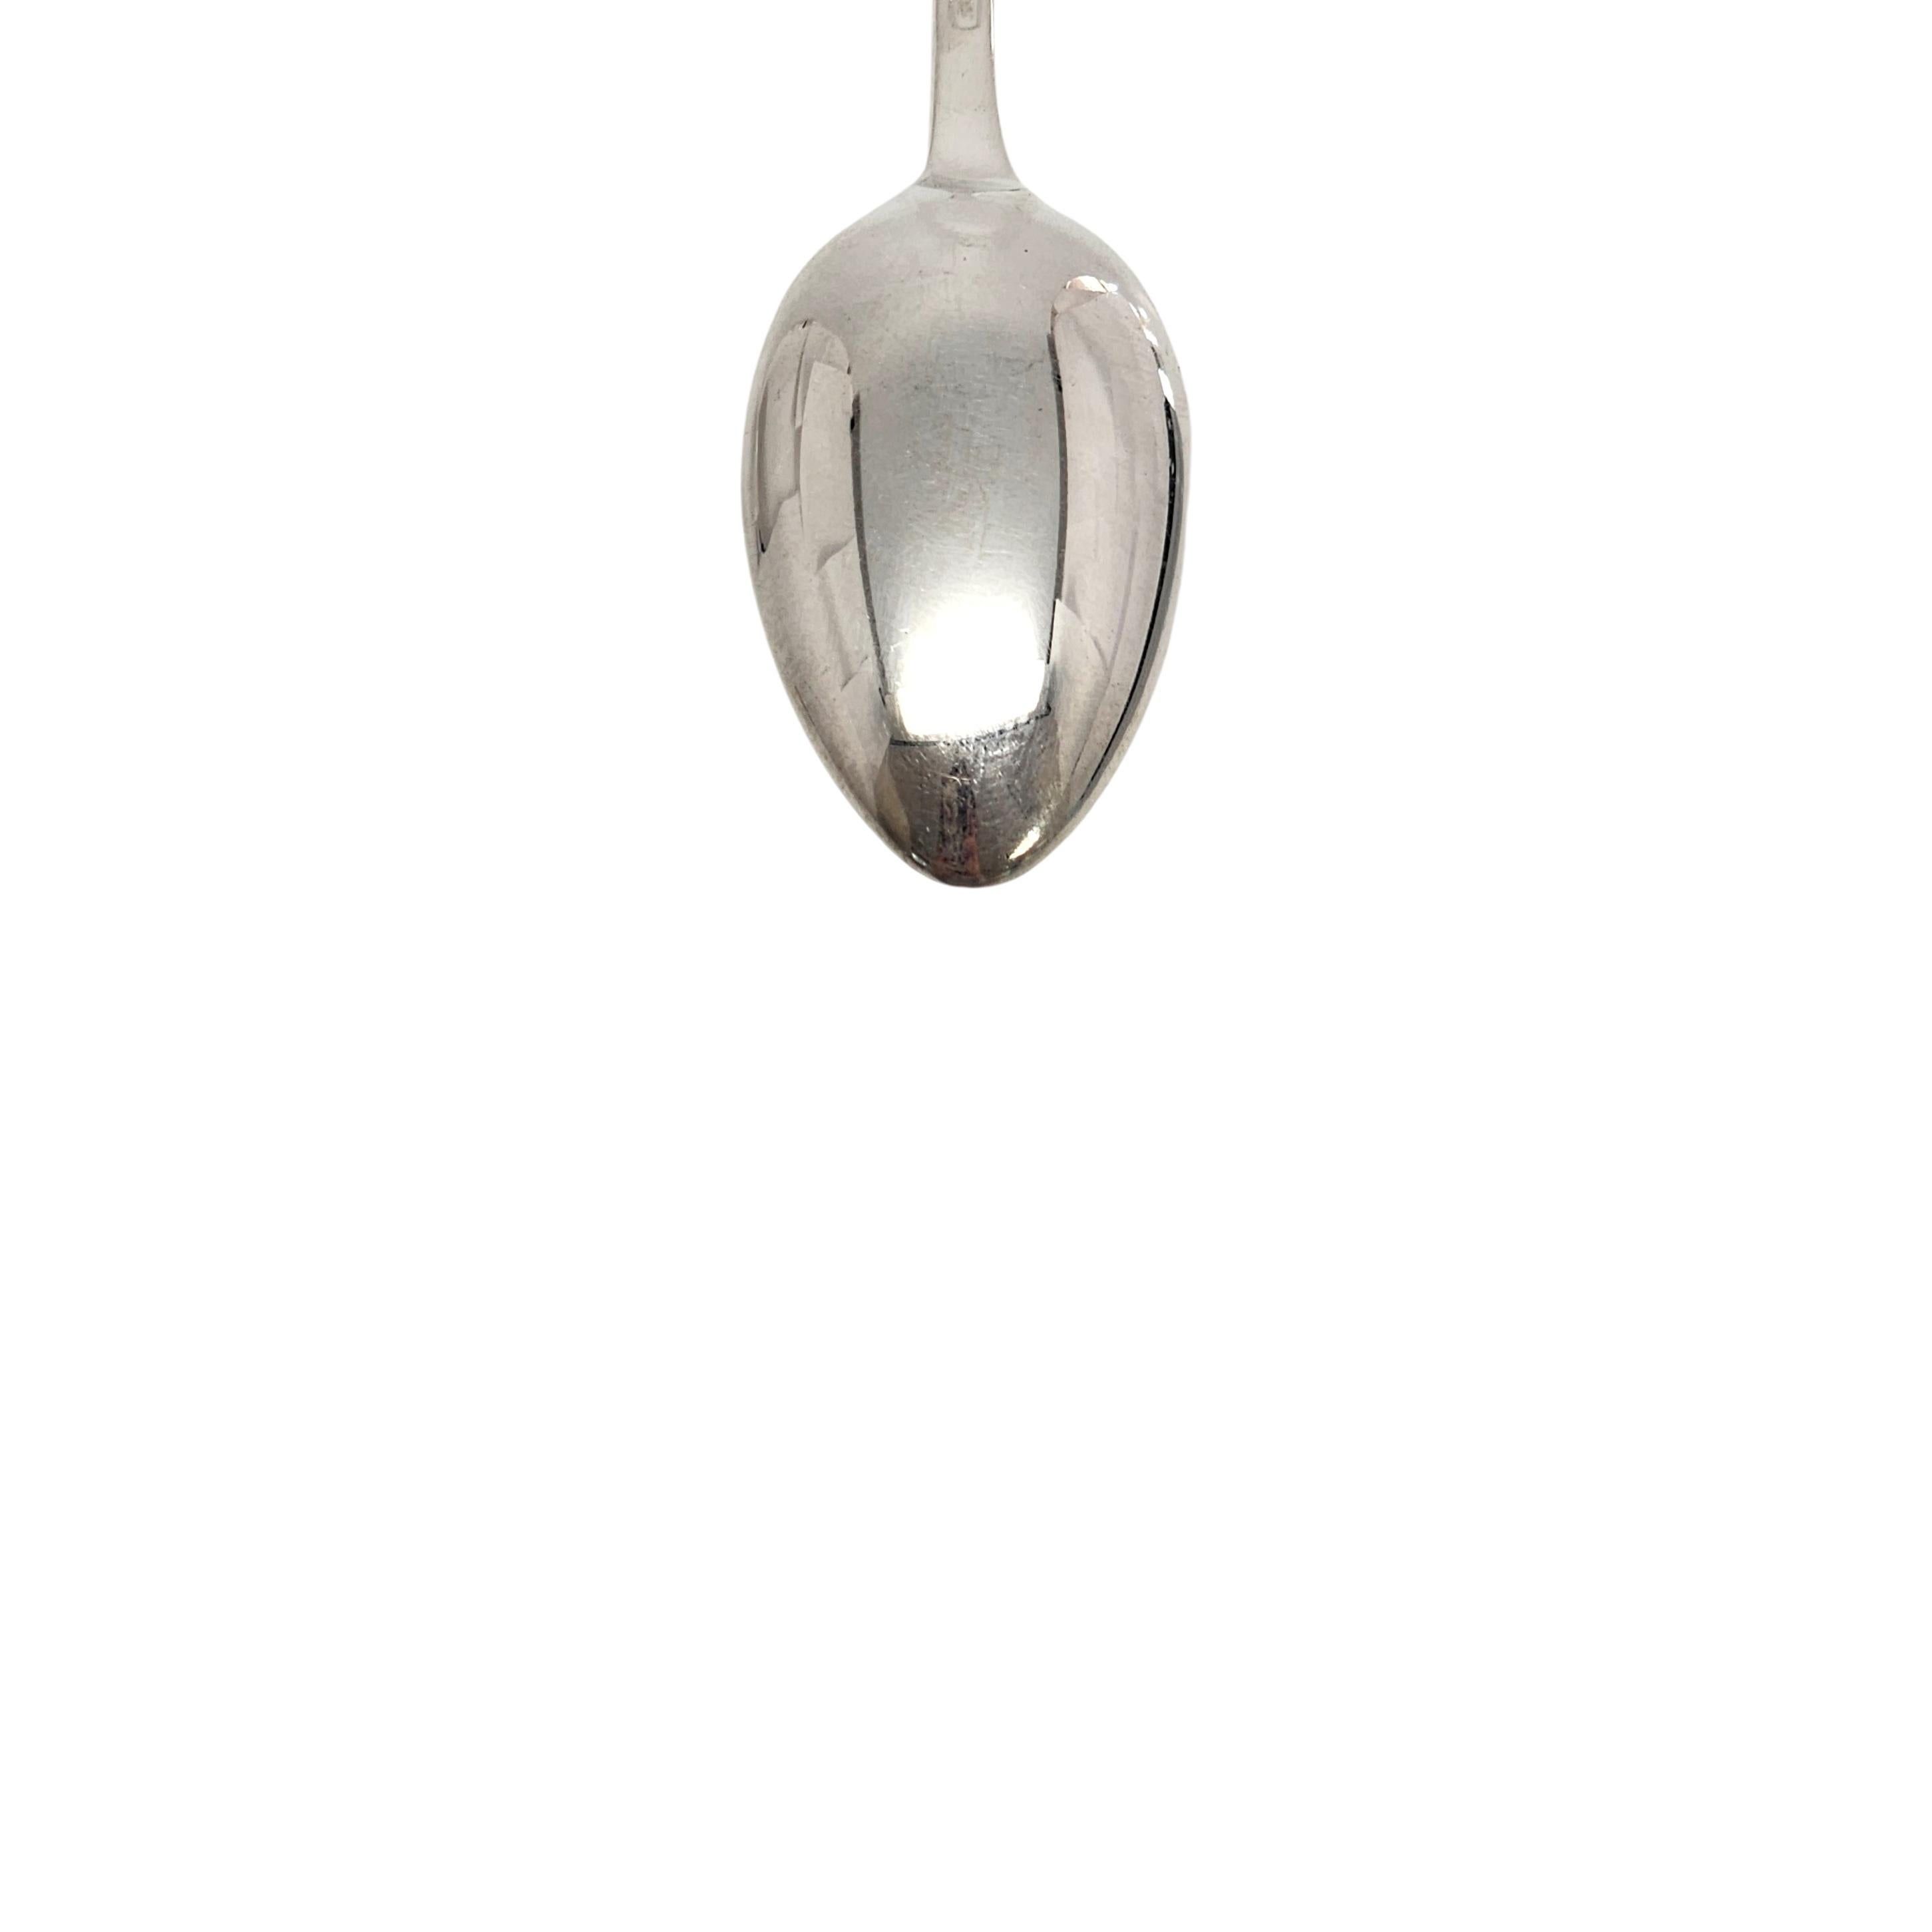 Tiffany & Co. Sterling Silver Faneuil Baby Feeding Spoon with Pouch 8